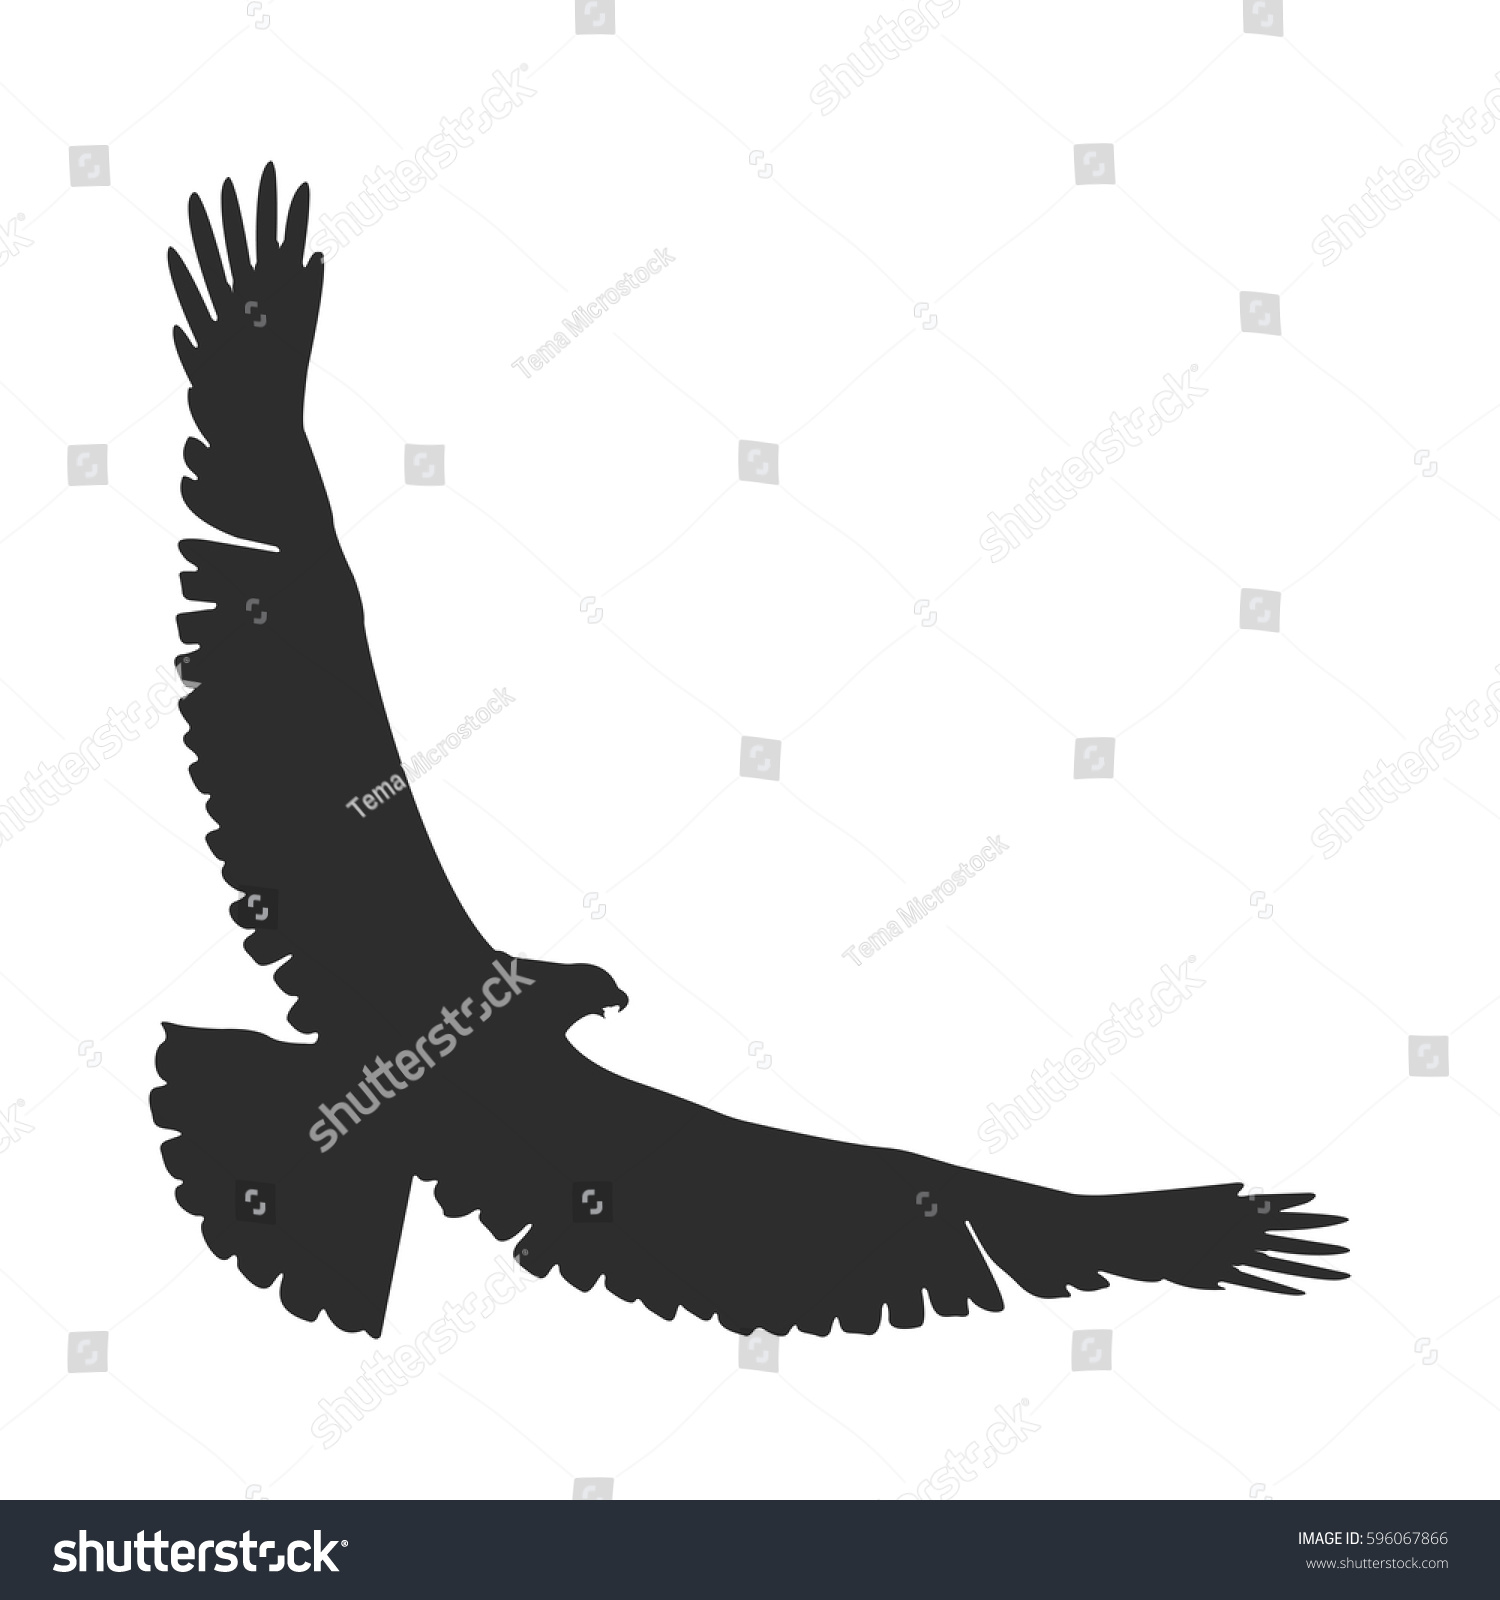 Silhouette Soaring Bird Separately Isolated Image Stock Vector ...